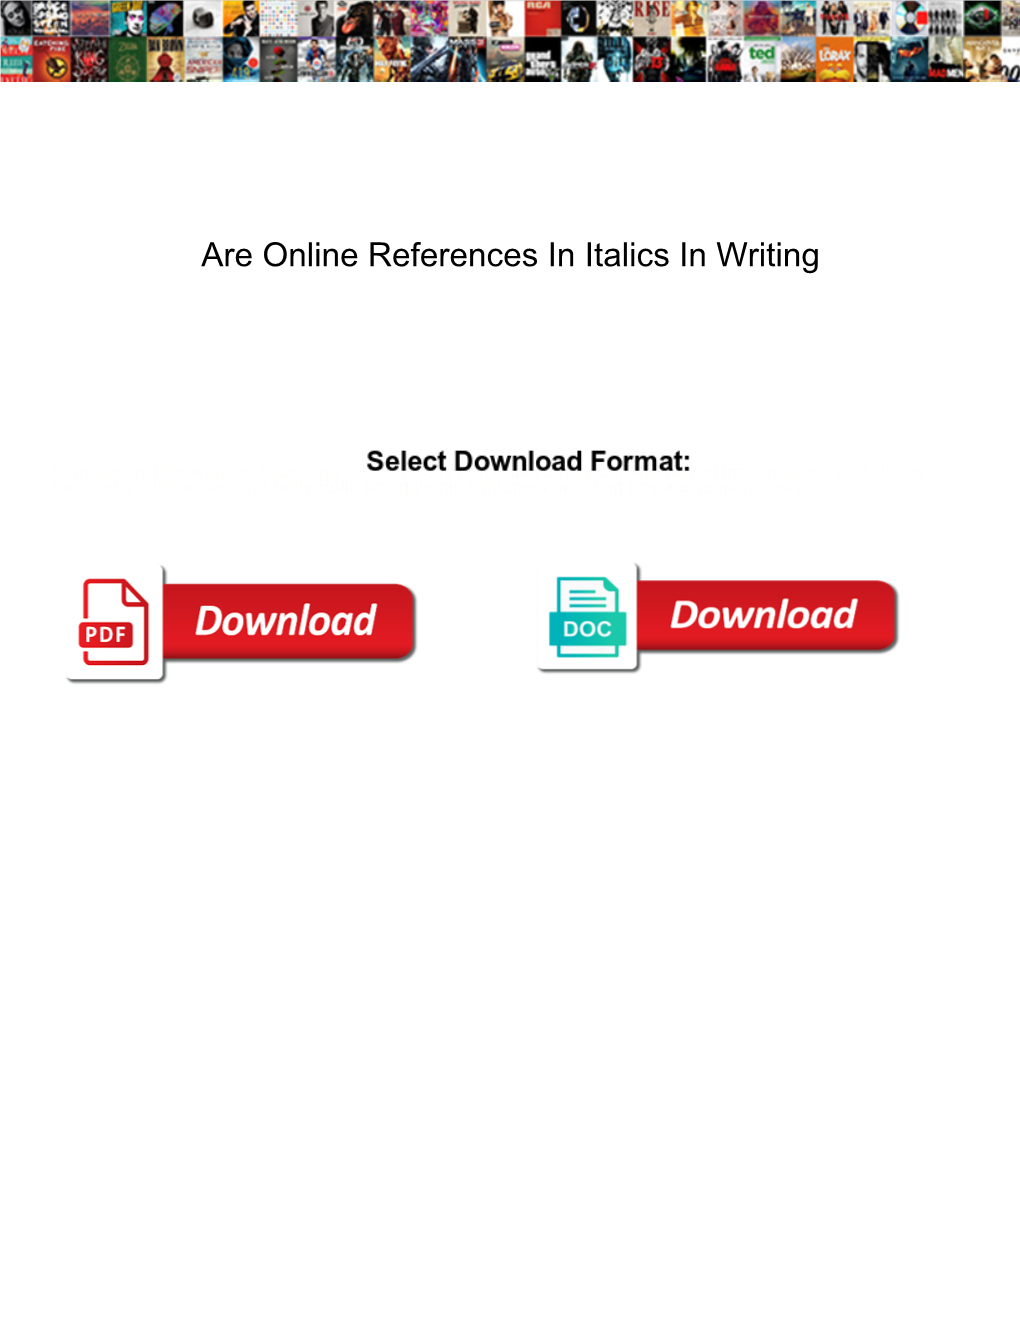 Are Online References in Italics in Writing